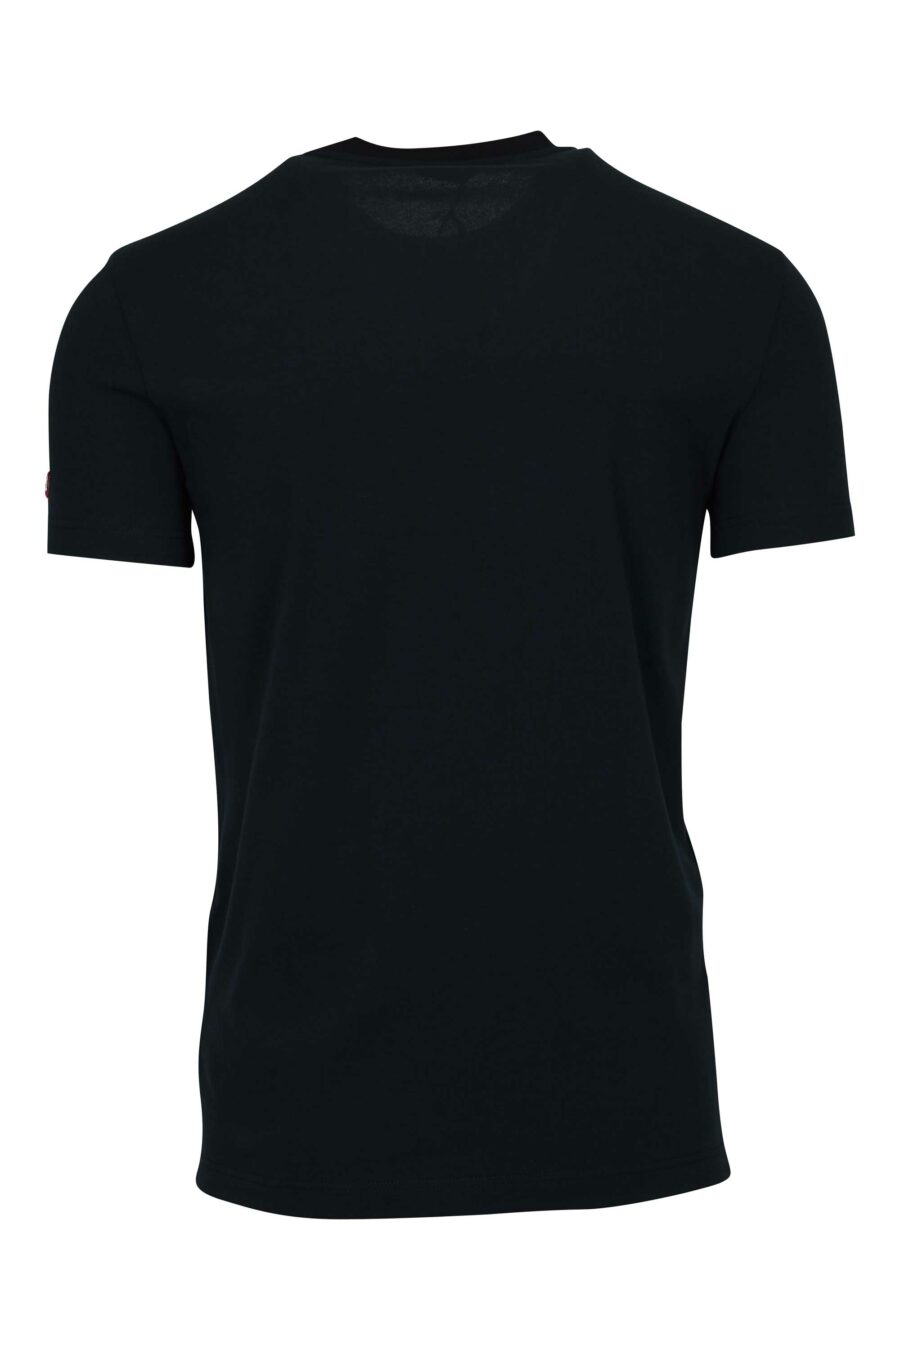 Black T-shirt with logo label - 8032674811202 1